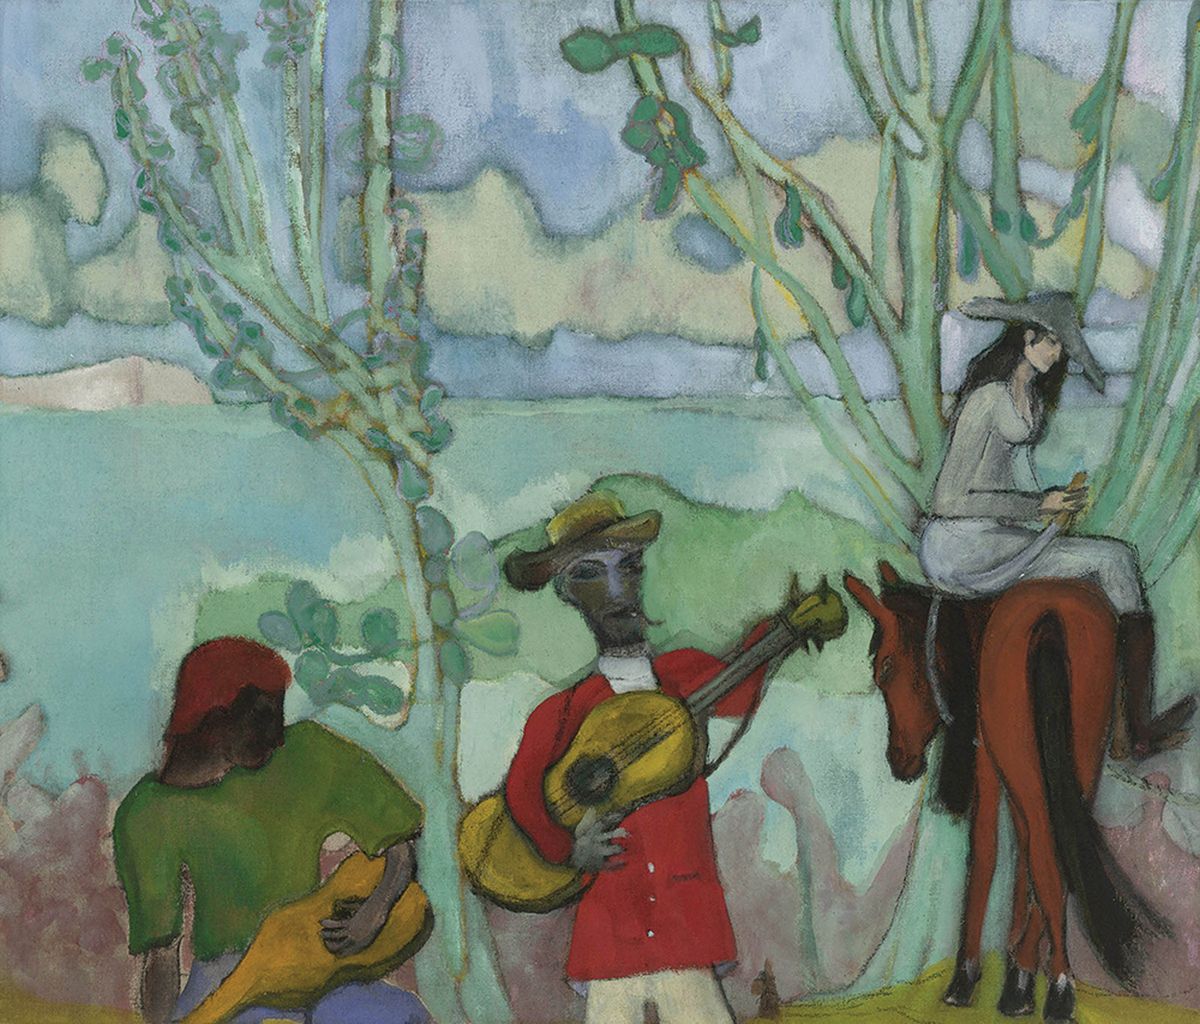 Peter Doig’s Music (2 Trees, 2019) © Peter Doig. All Rights Reserved, DACS 2019. Courtesy Michael Werner Gallery, New York and London.